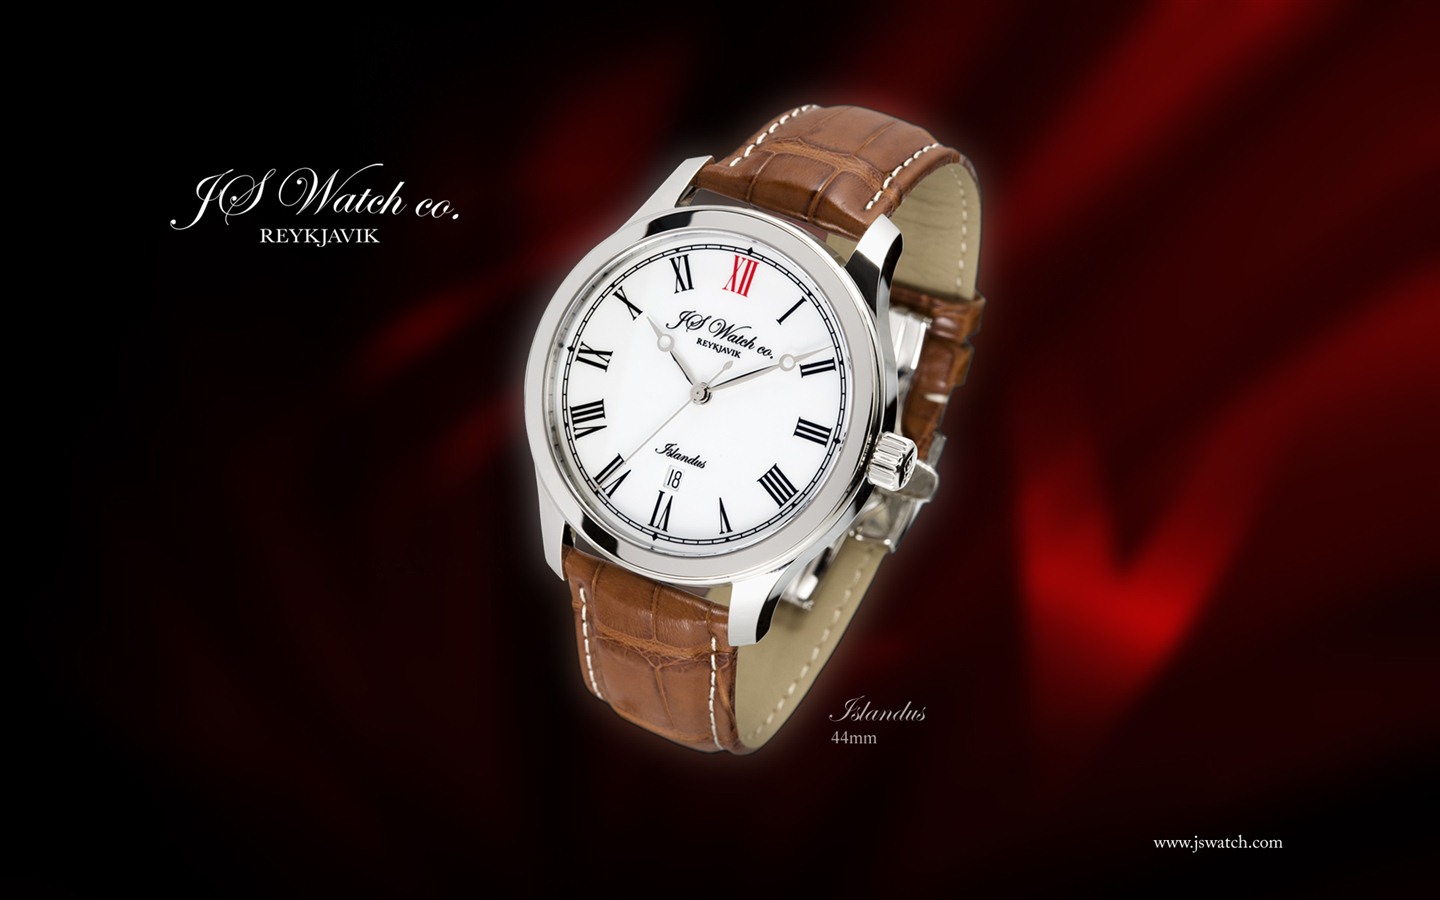 World famous watches wallpapers (2) #1 - 1440x900